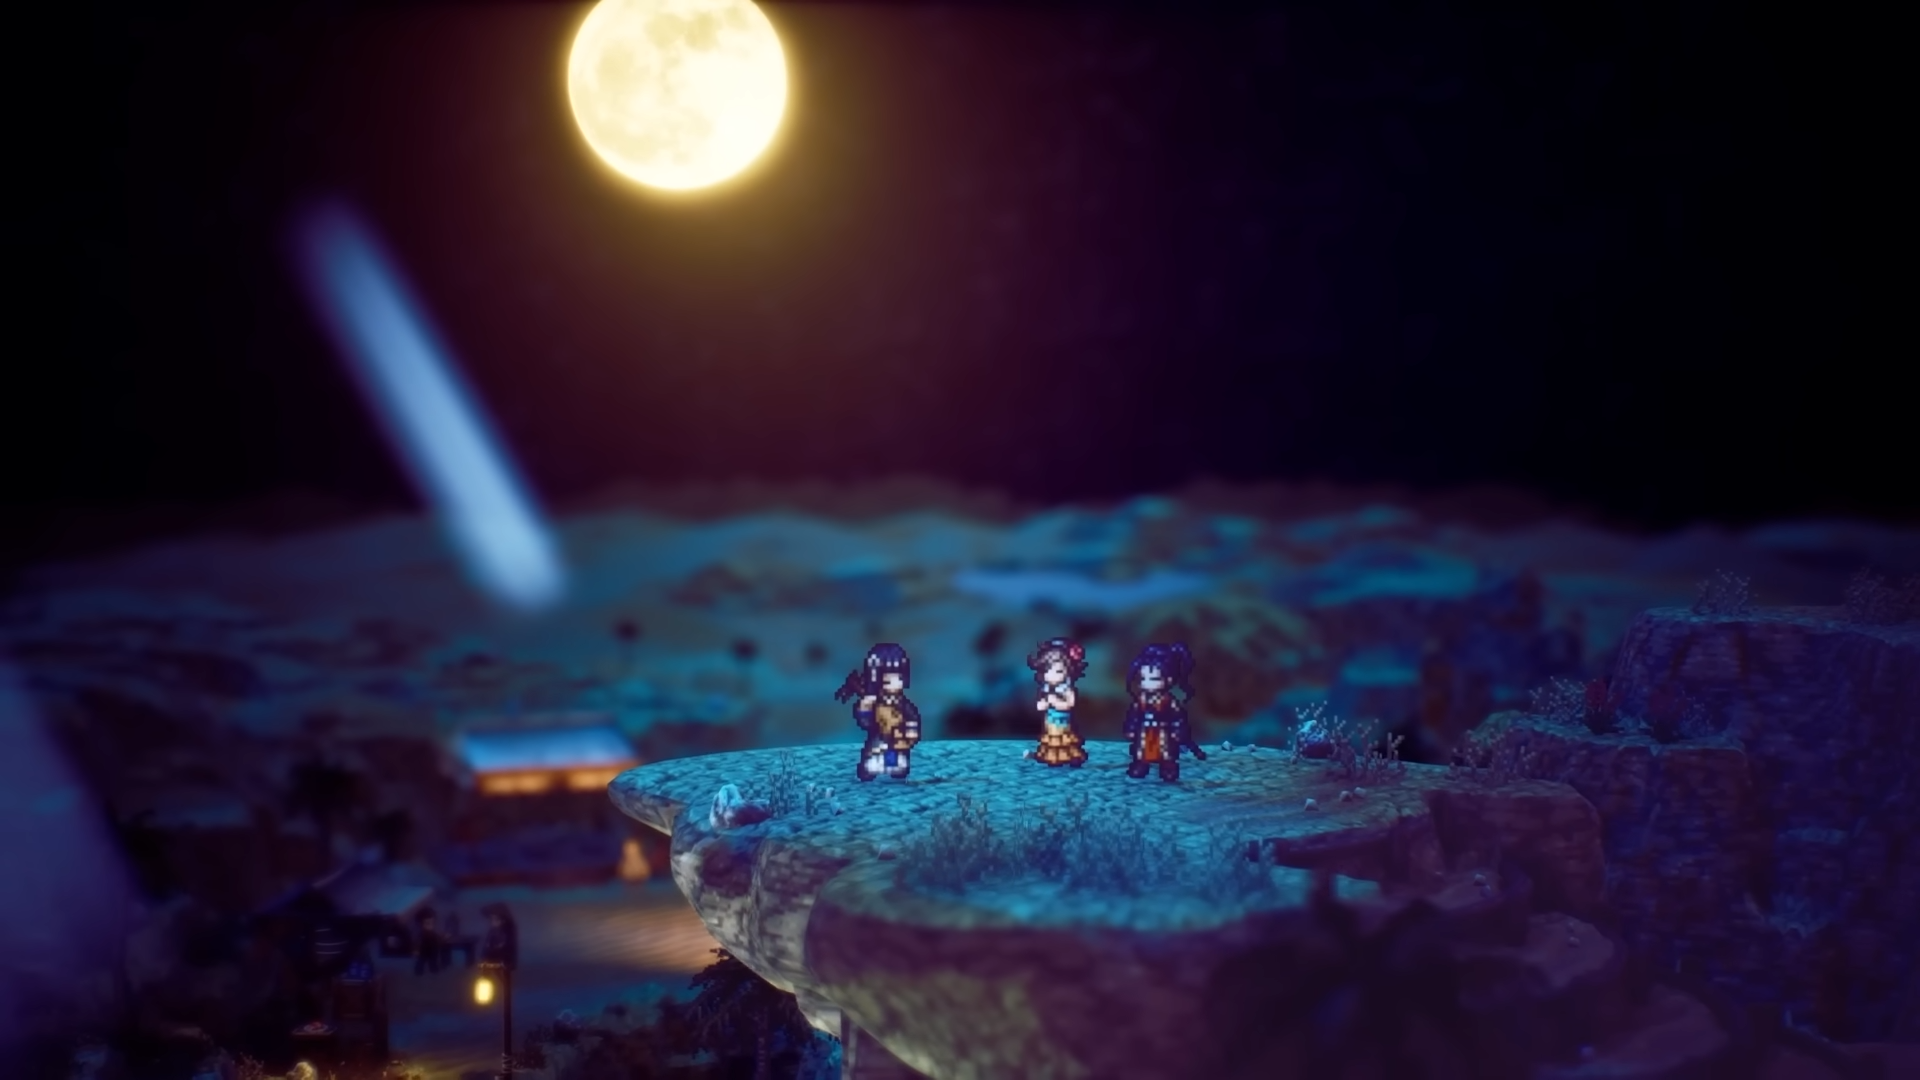 Agnea and Hikari listen to a musician in the moonlight in Octopath Traveler 2